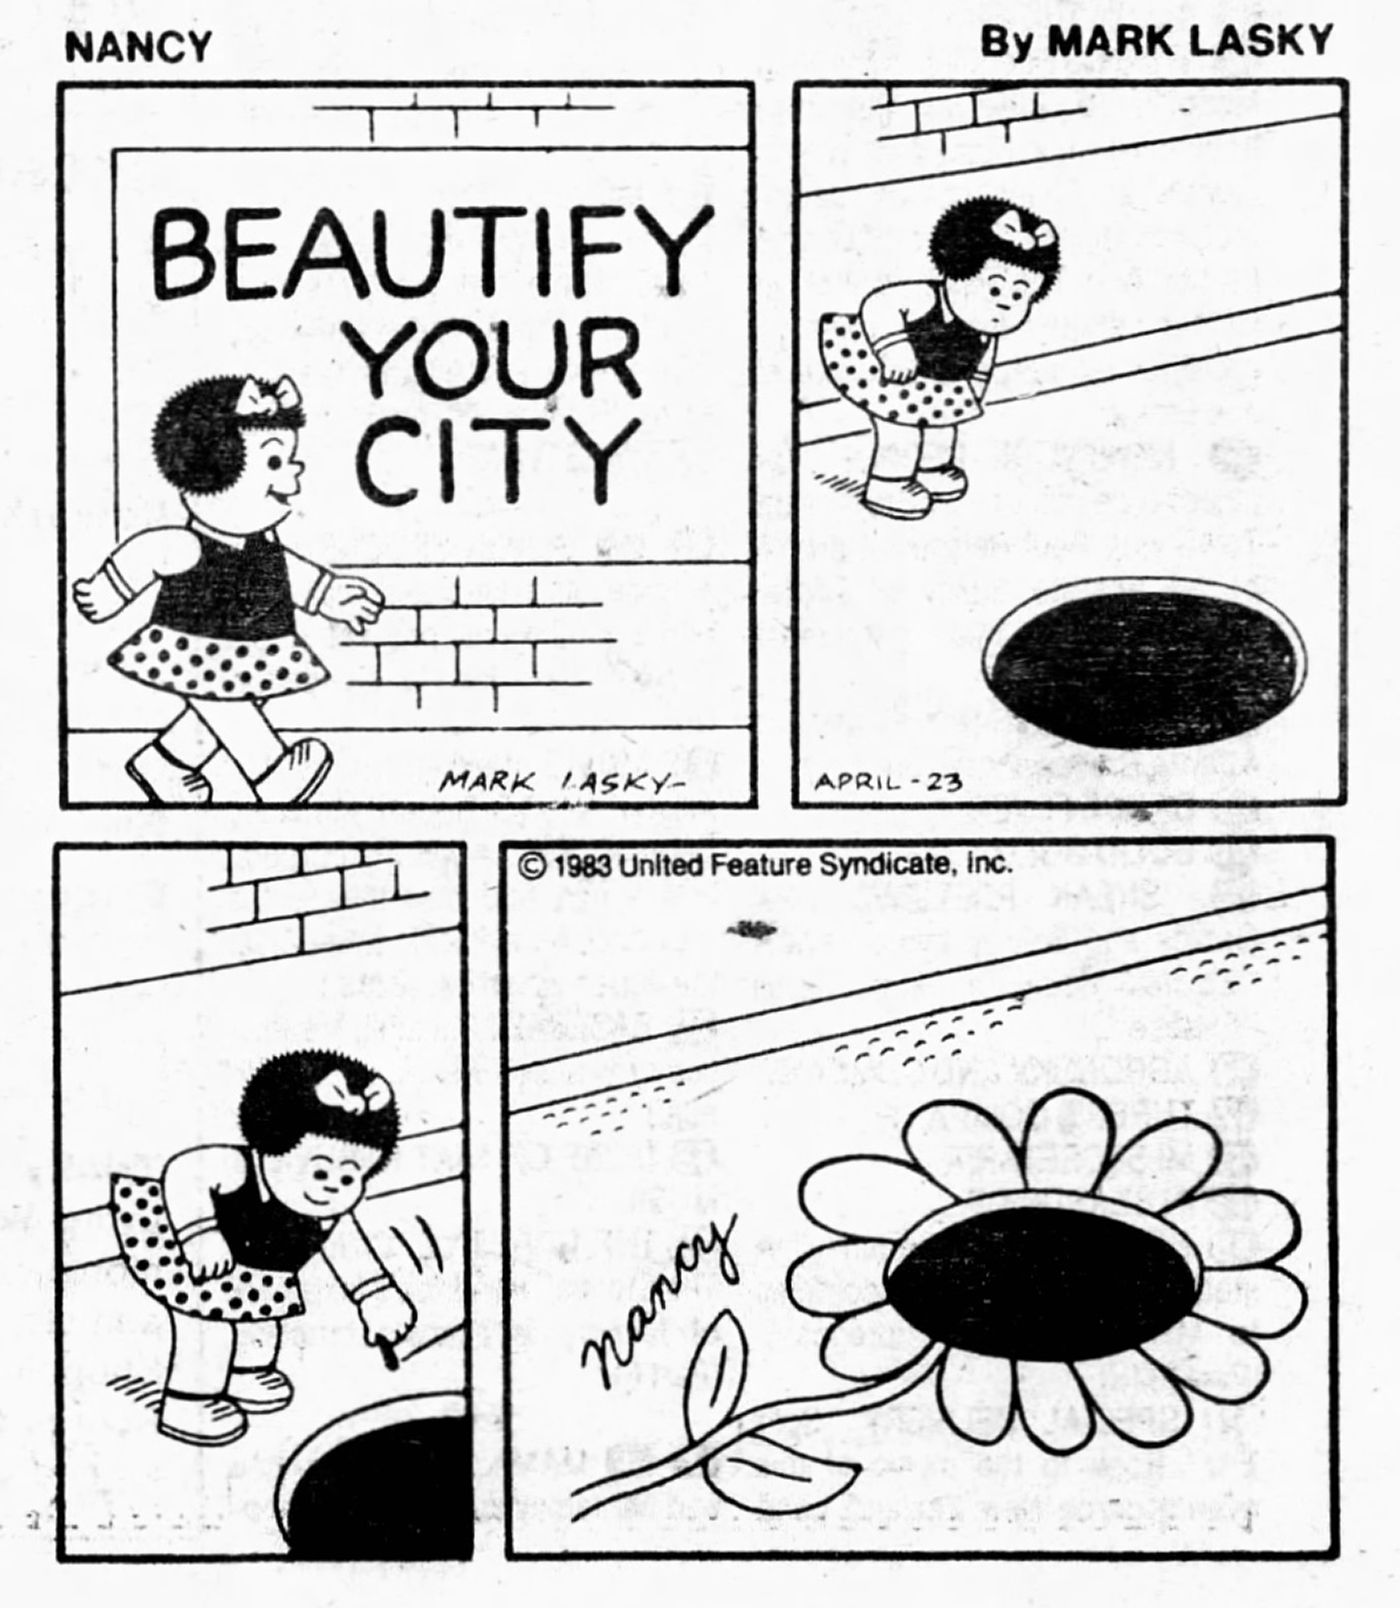 Nancy sees a sign that says "Beautify your city." She walks past an open manhole, and graffitis a flower around it. Beautified!